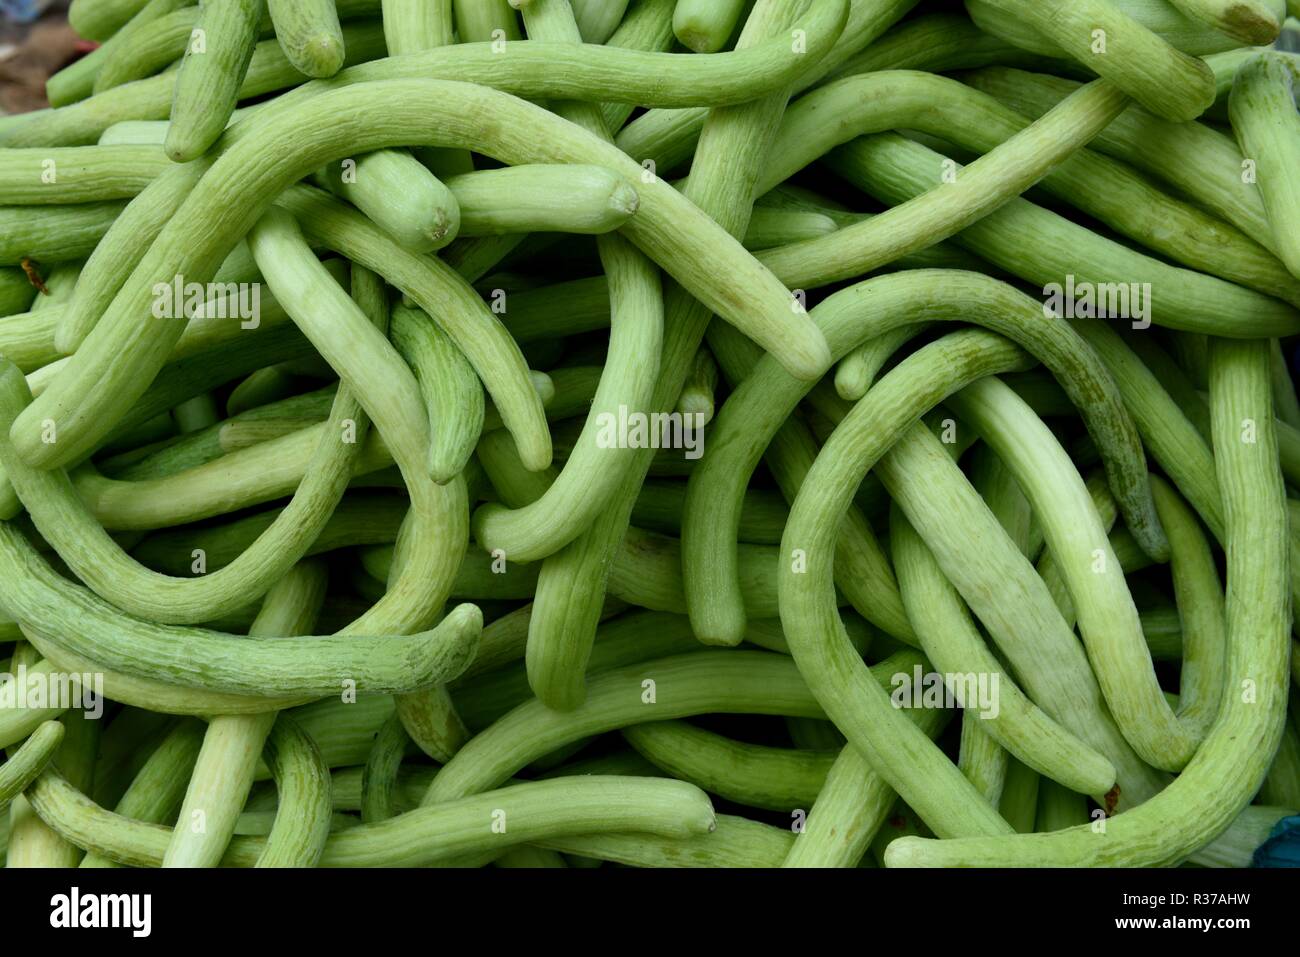 Indian Armenian Cucumbers, fresh harvested locally grown raw green Cucumbers or Cucumis melo var. flexuosus in a farmers produce market in India Stock Photo